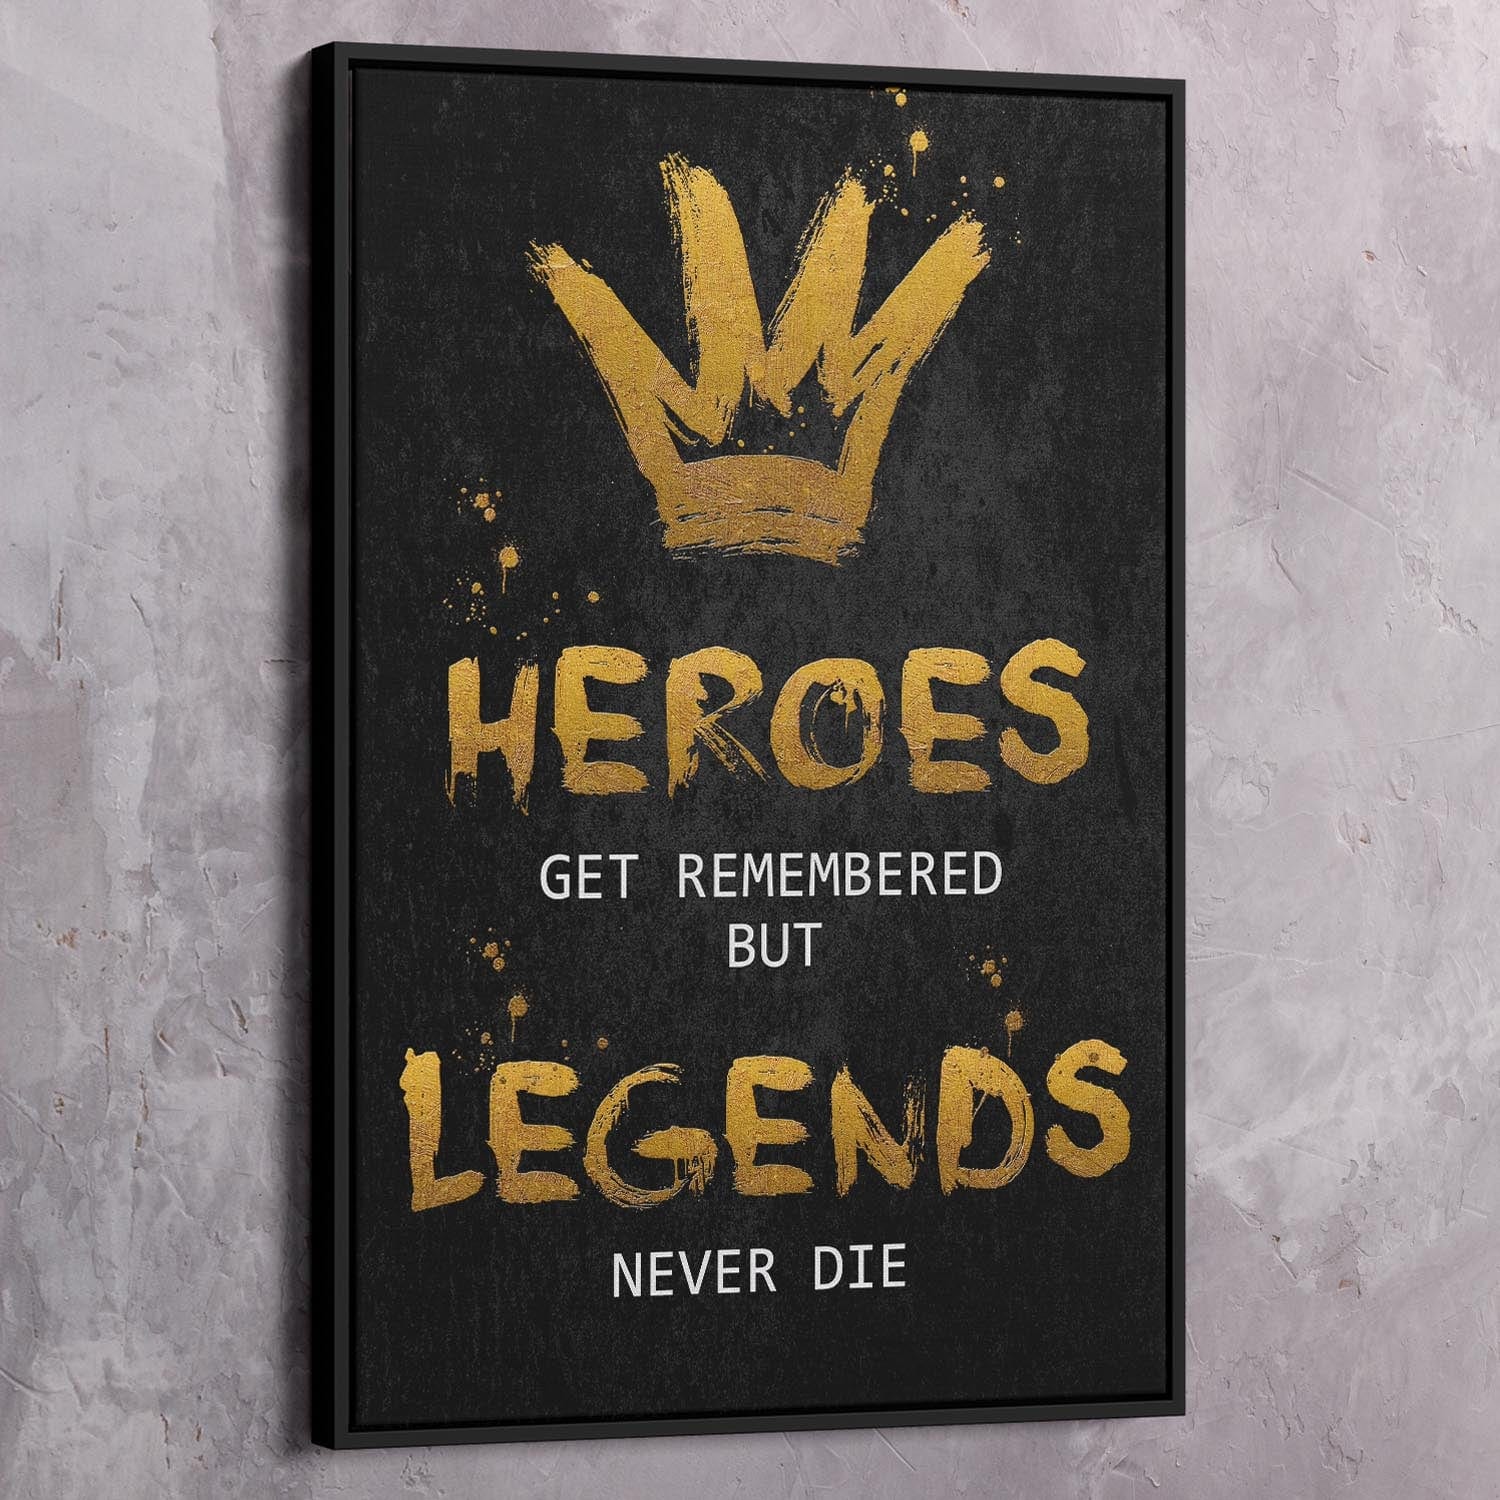 Heroes Get Remembered Wall Art | Inspirational Wall Art Motivational Wall Art Quotes Office Art | ImpaktMaker Exclusive Canvas Art Portrait